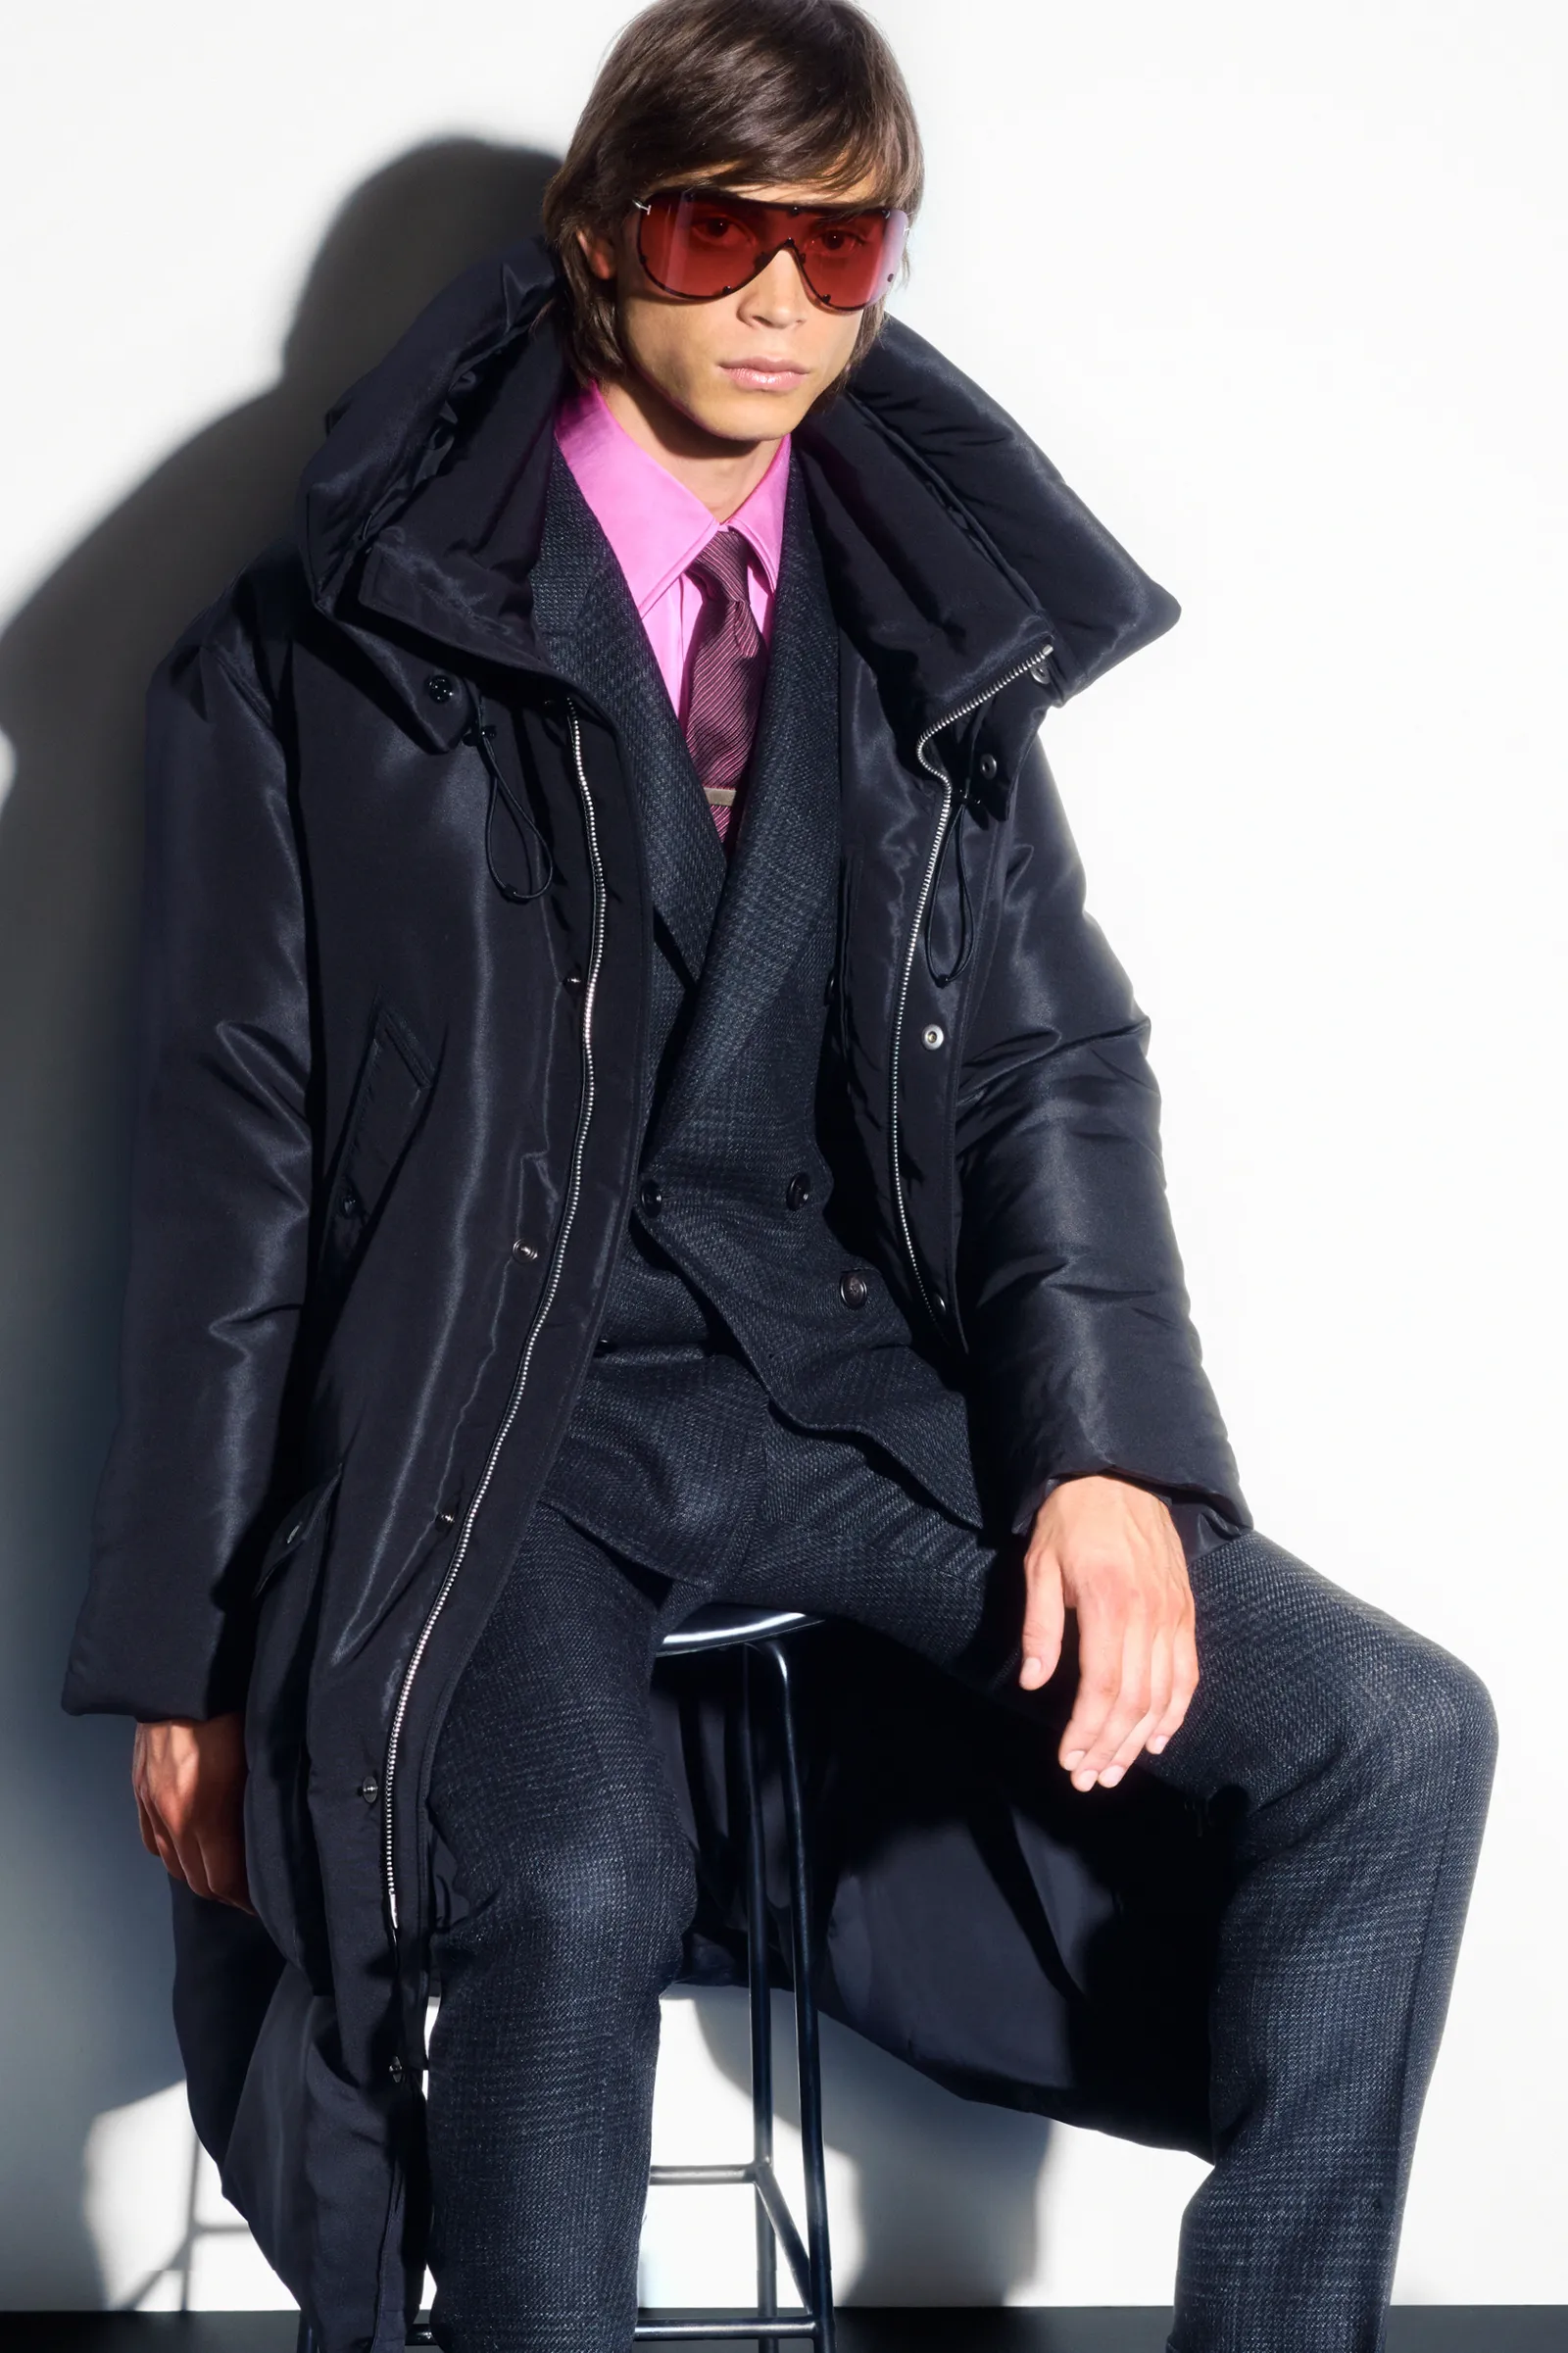 00009-tom-ford-fall-22-mens-nyc-credit-brand.png